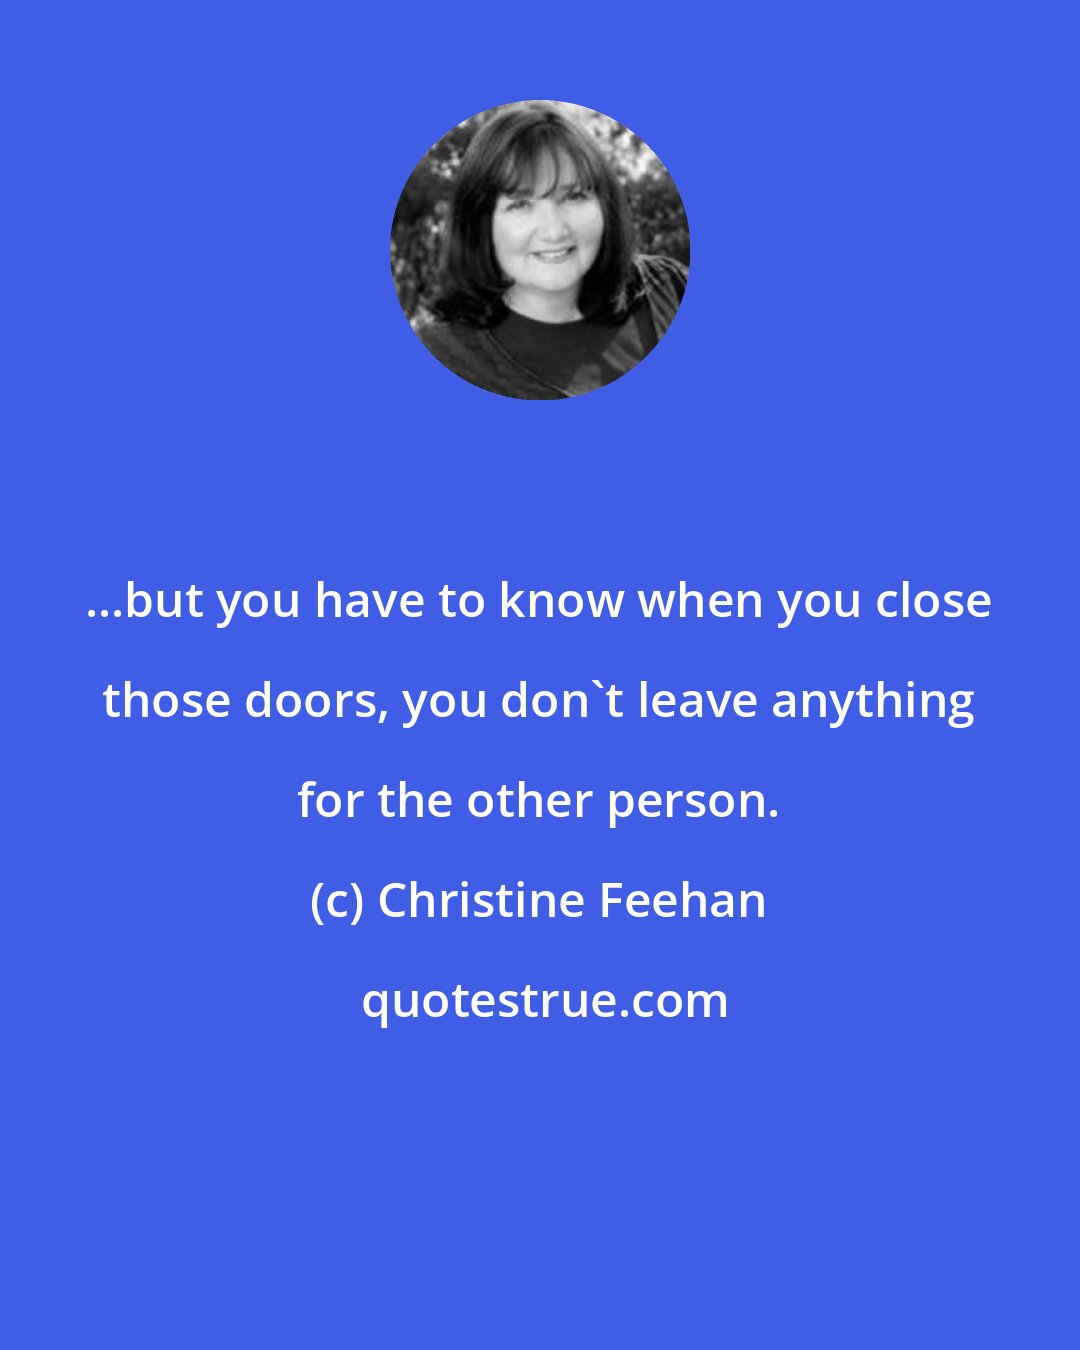 Christine Feehan: ...but you have to know when you close those doors, you don't leave anything for the other person.